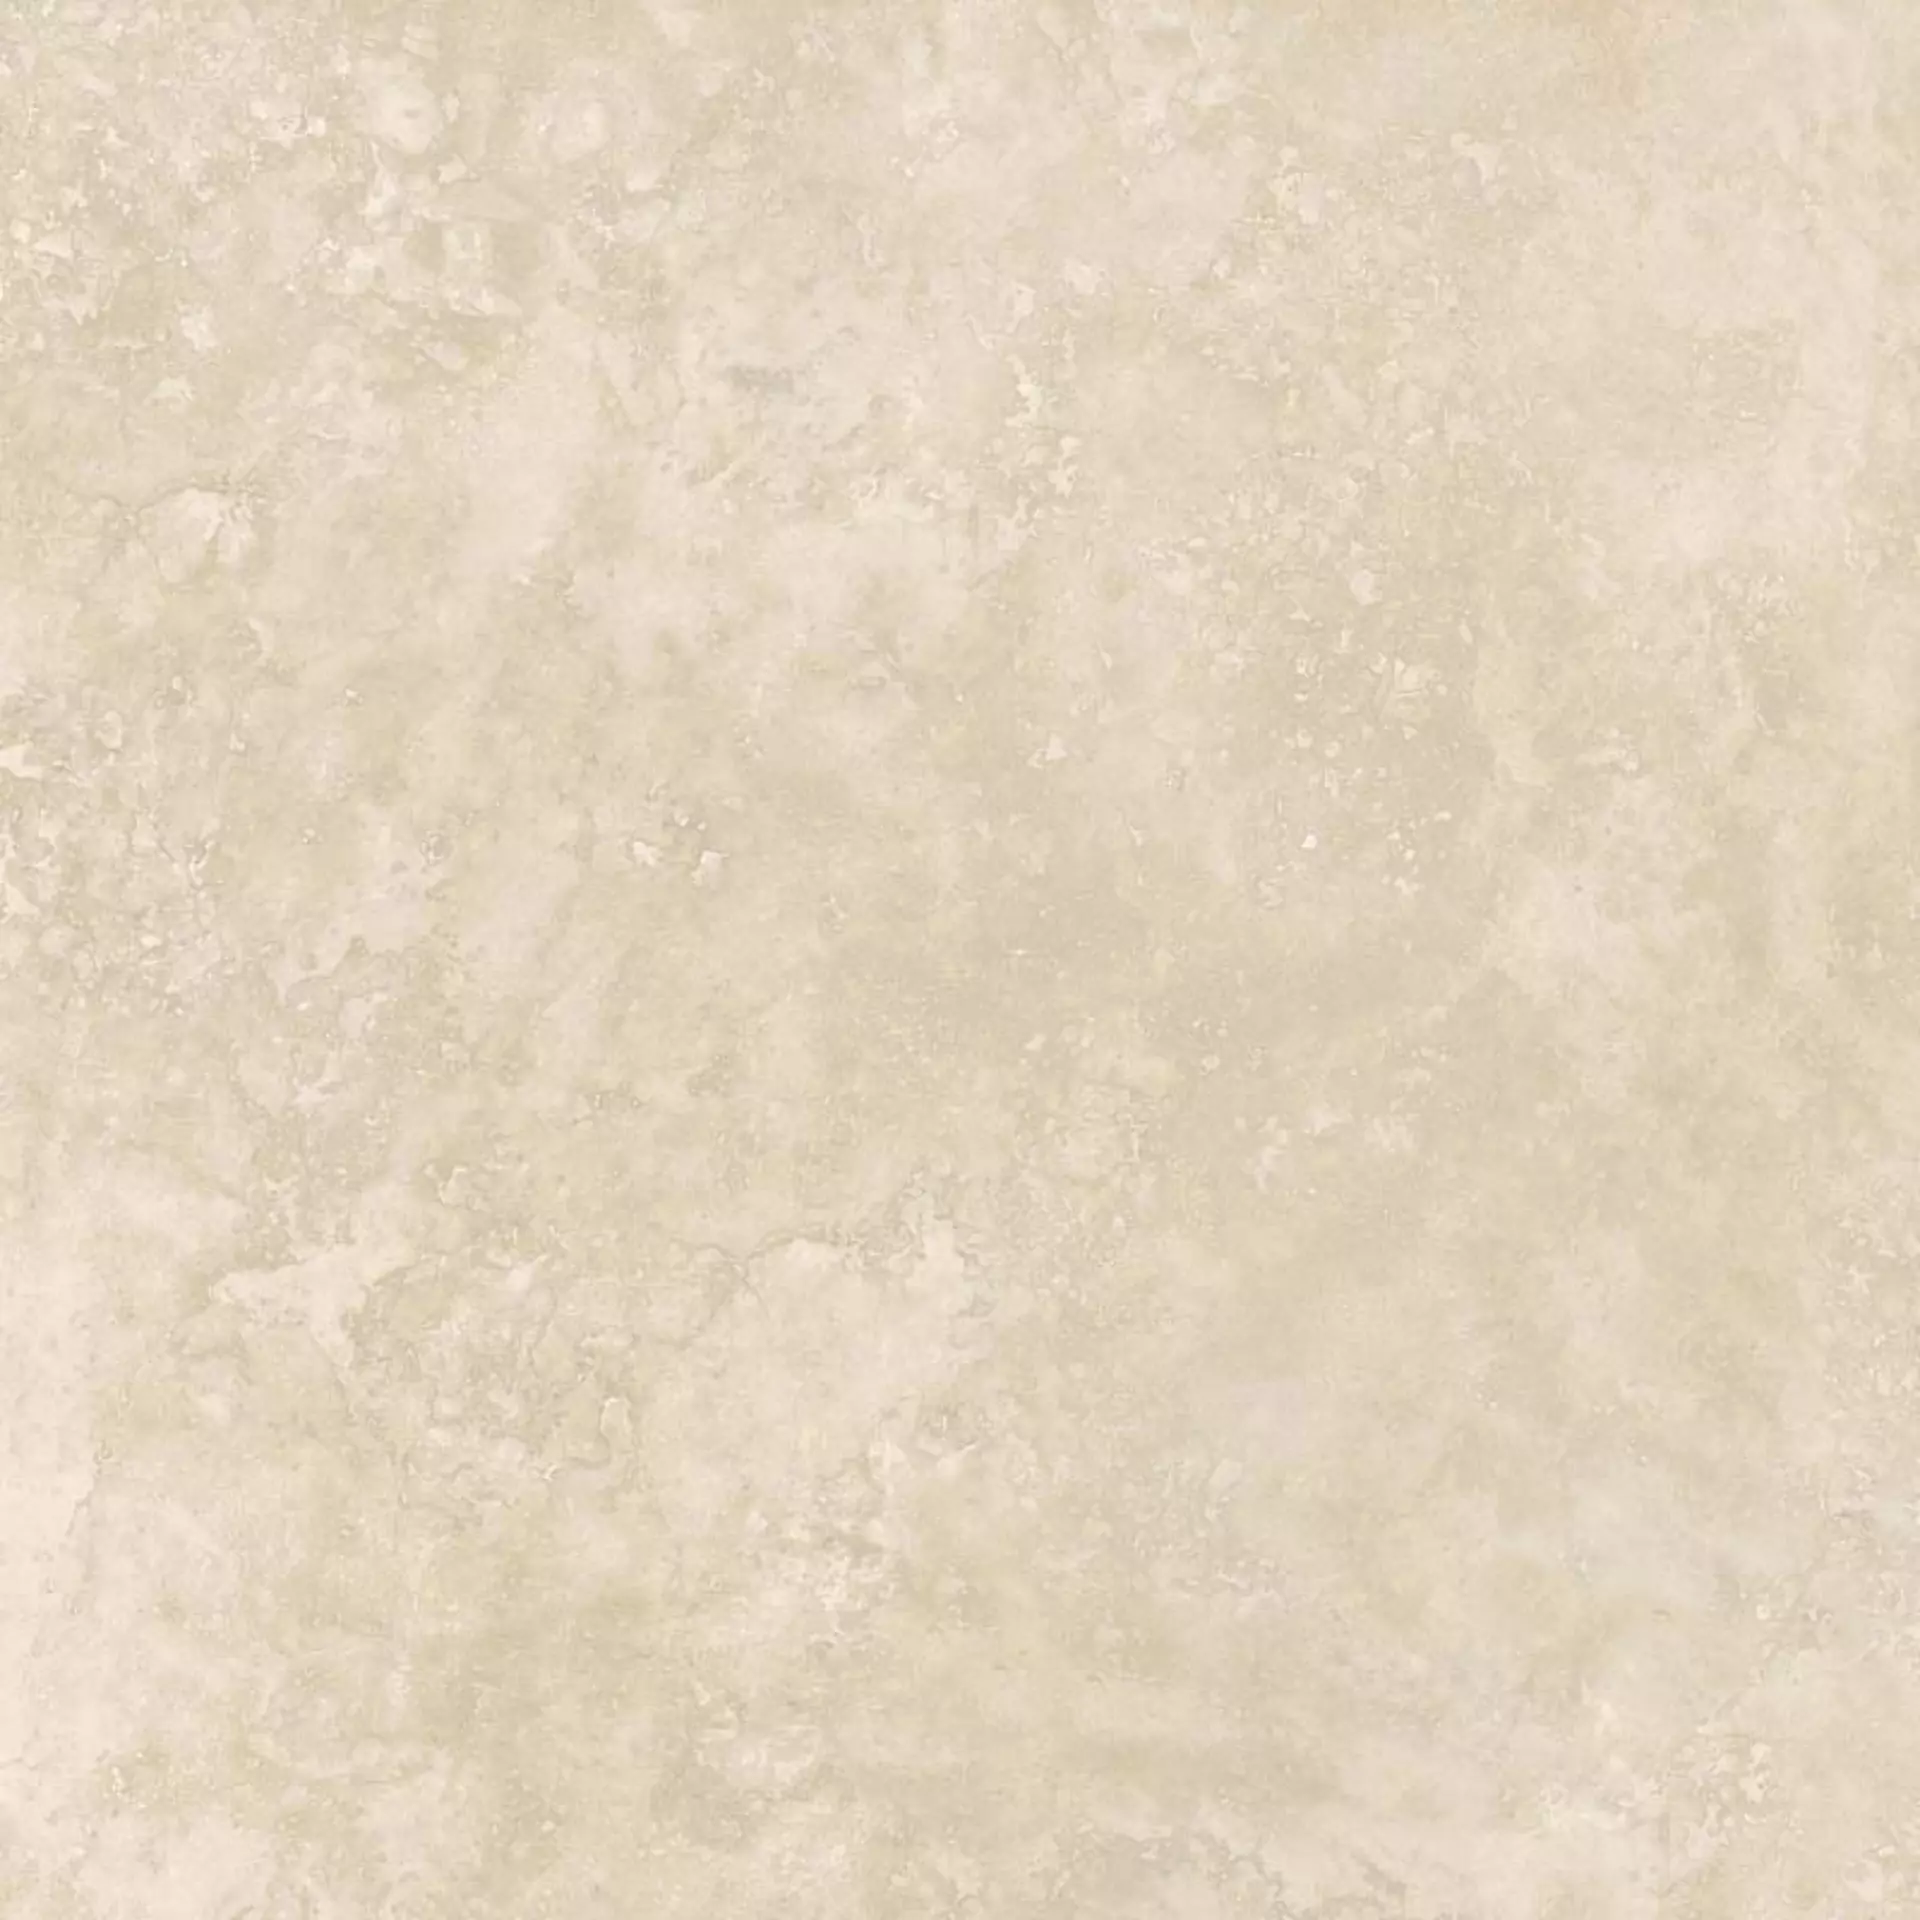 Sant Agostino Via Appia Beige Natural CSAACCBE12 120x120cm rectified 10mm